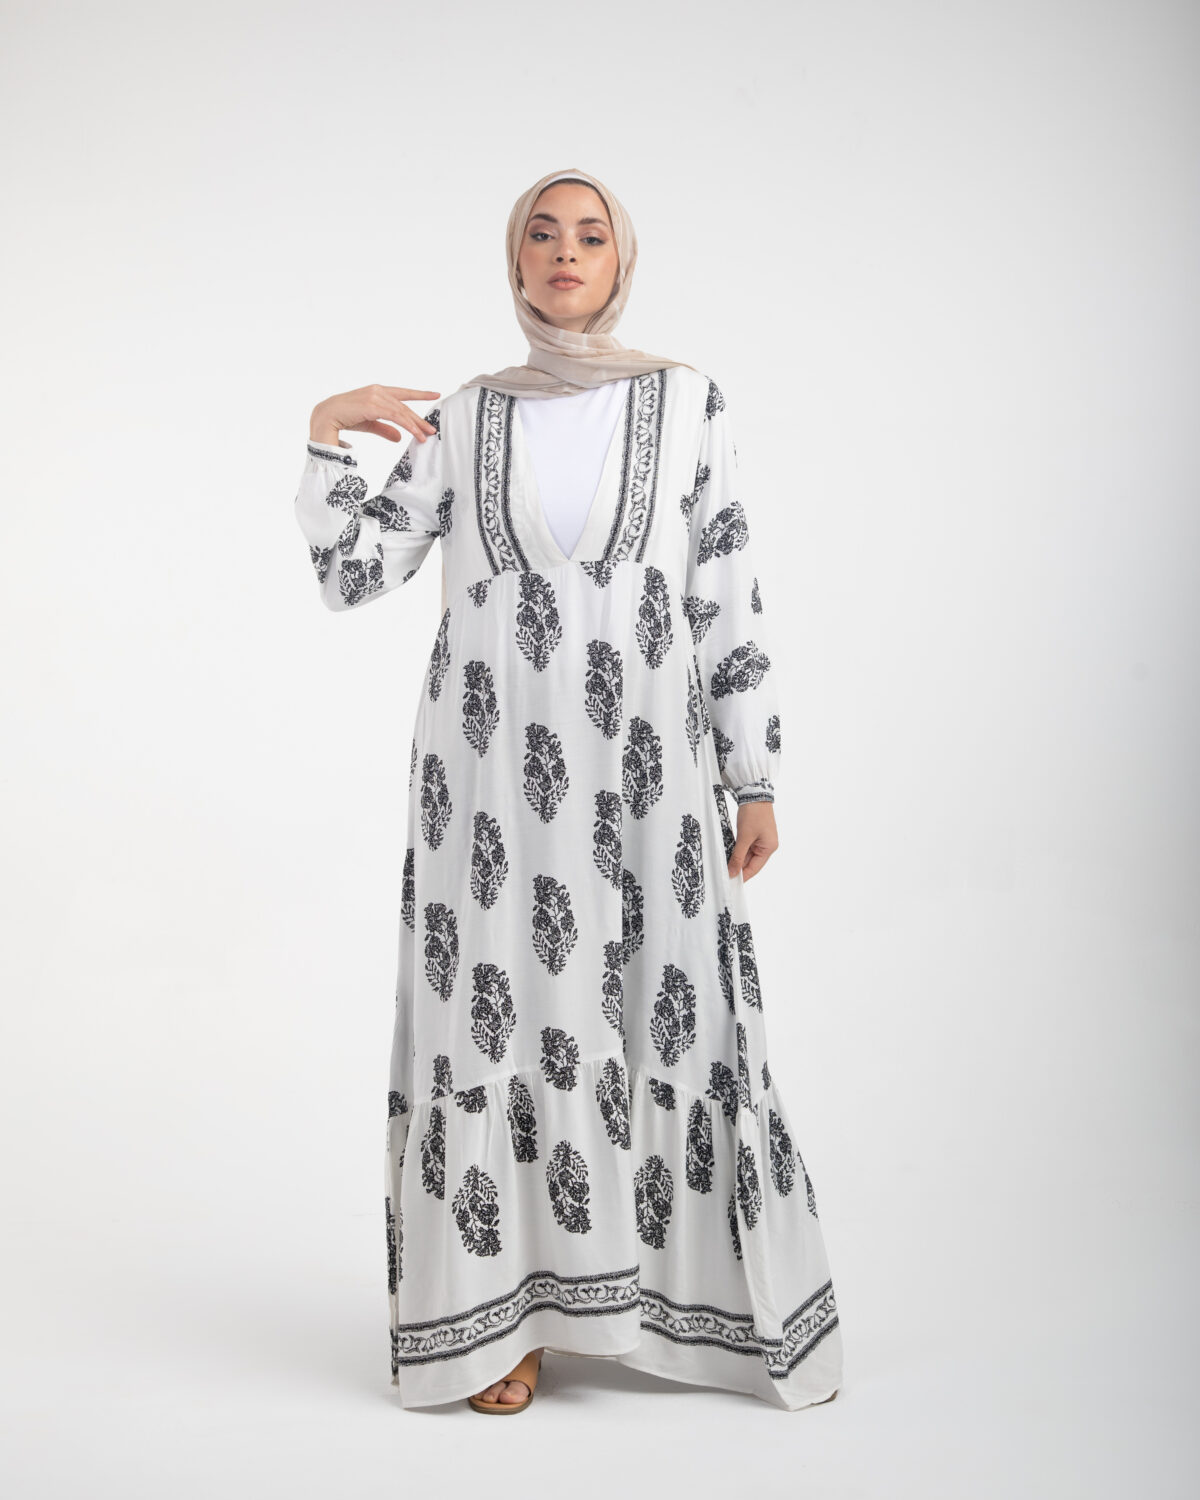 Modest black and white tropical printed dress